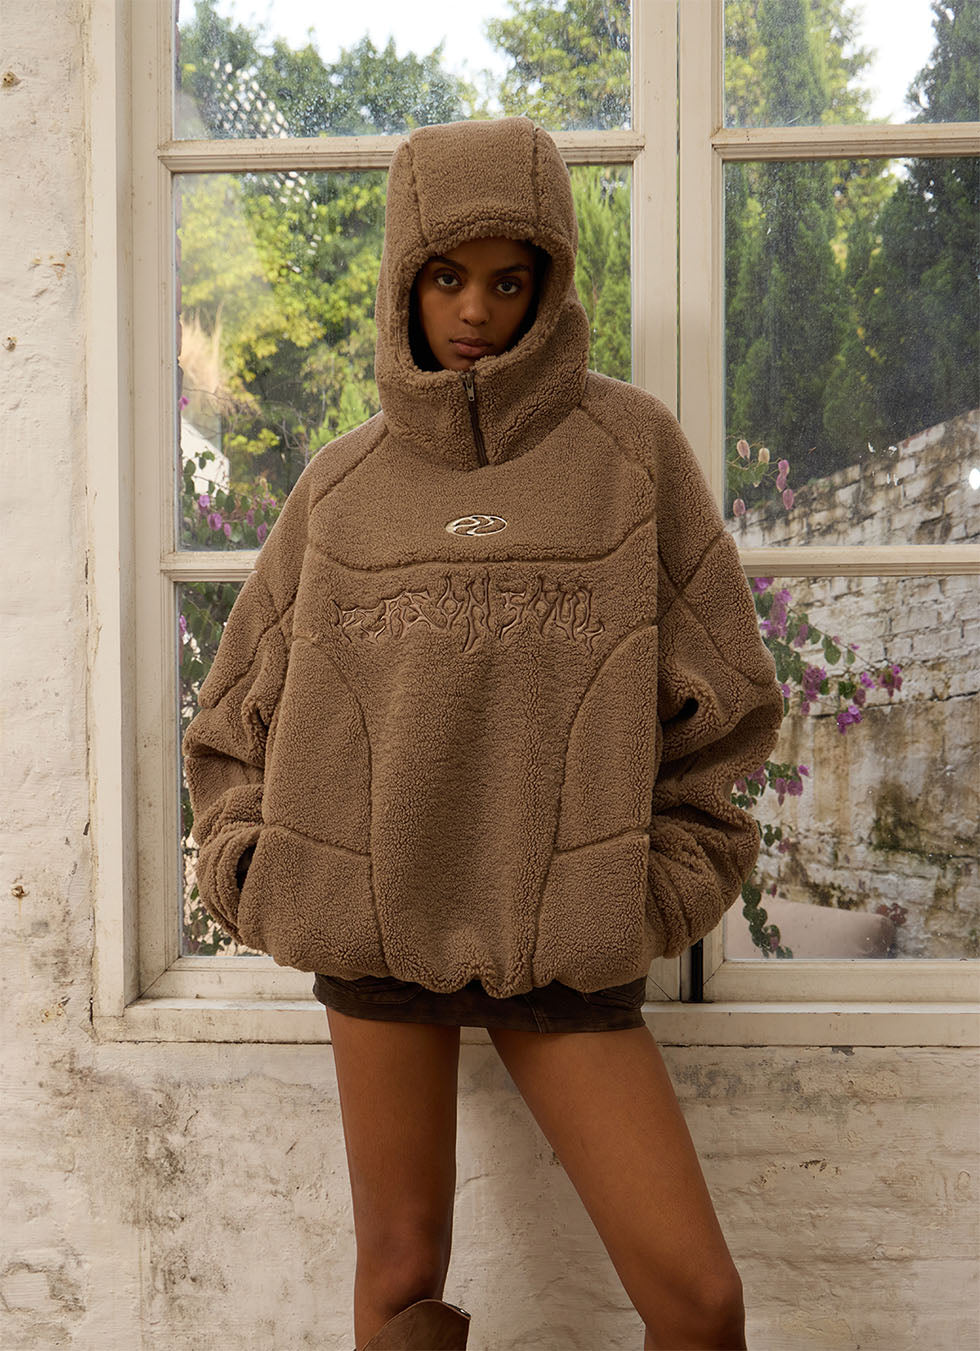 Hooded Pullover Jacket